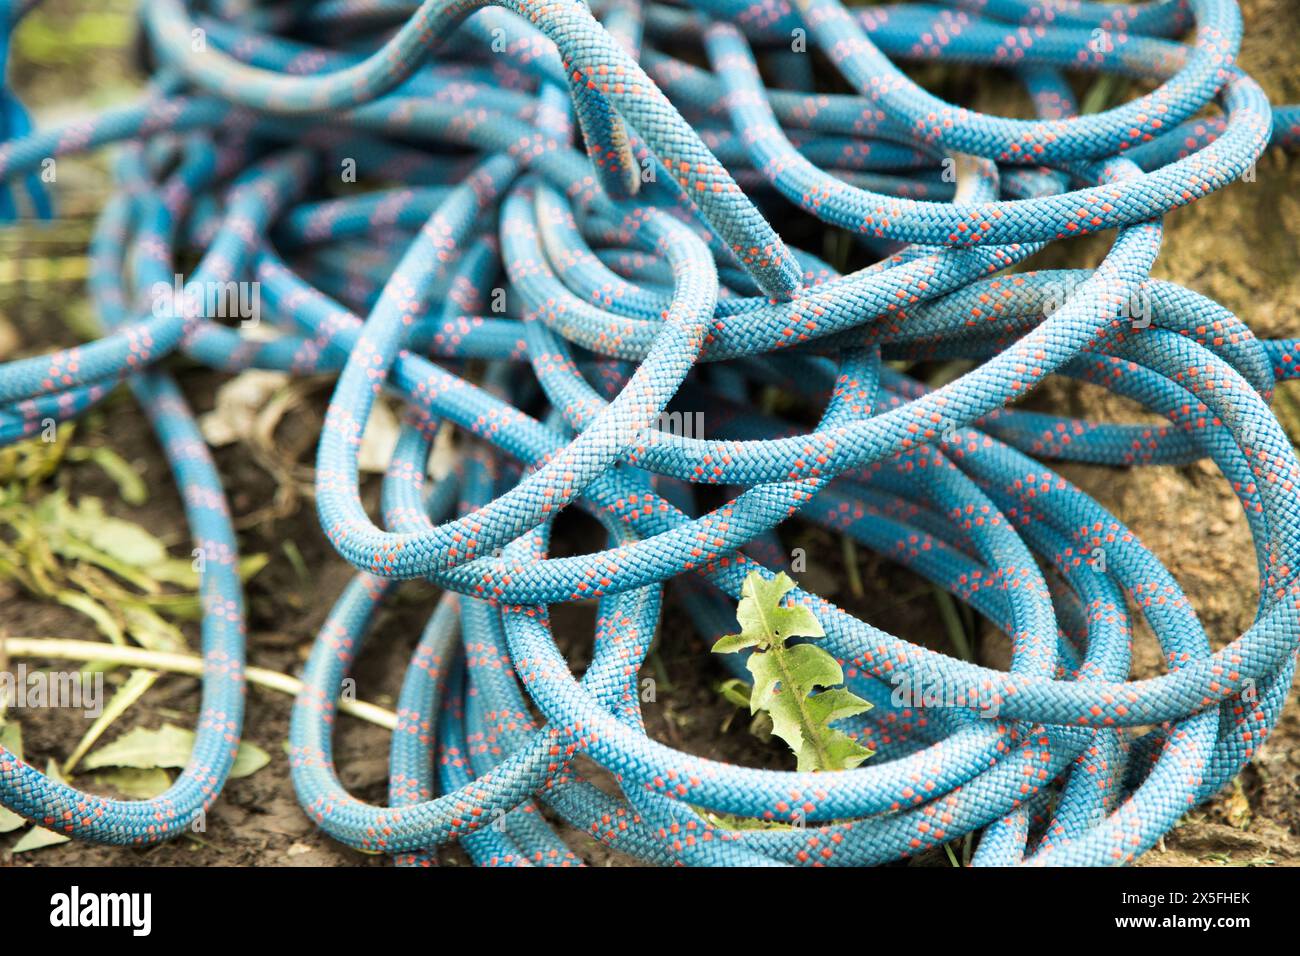 Rolled blue rope, rock climbing rope on ground . Close up view Stock Photo